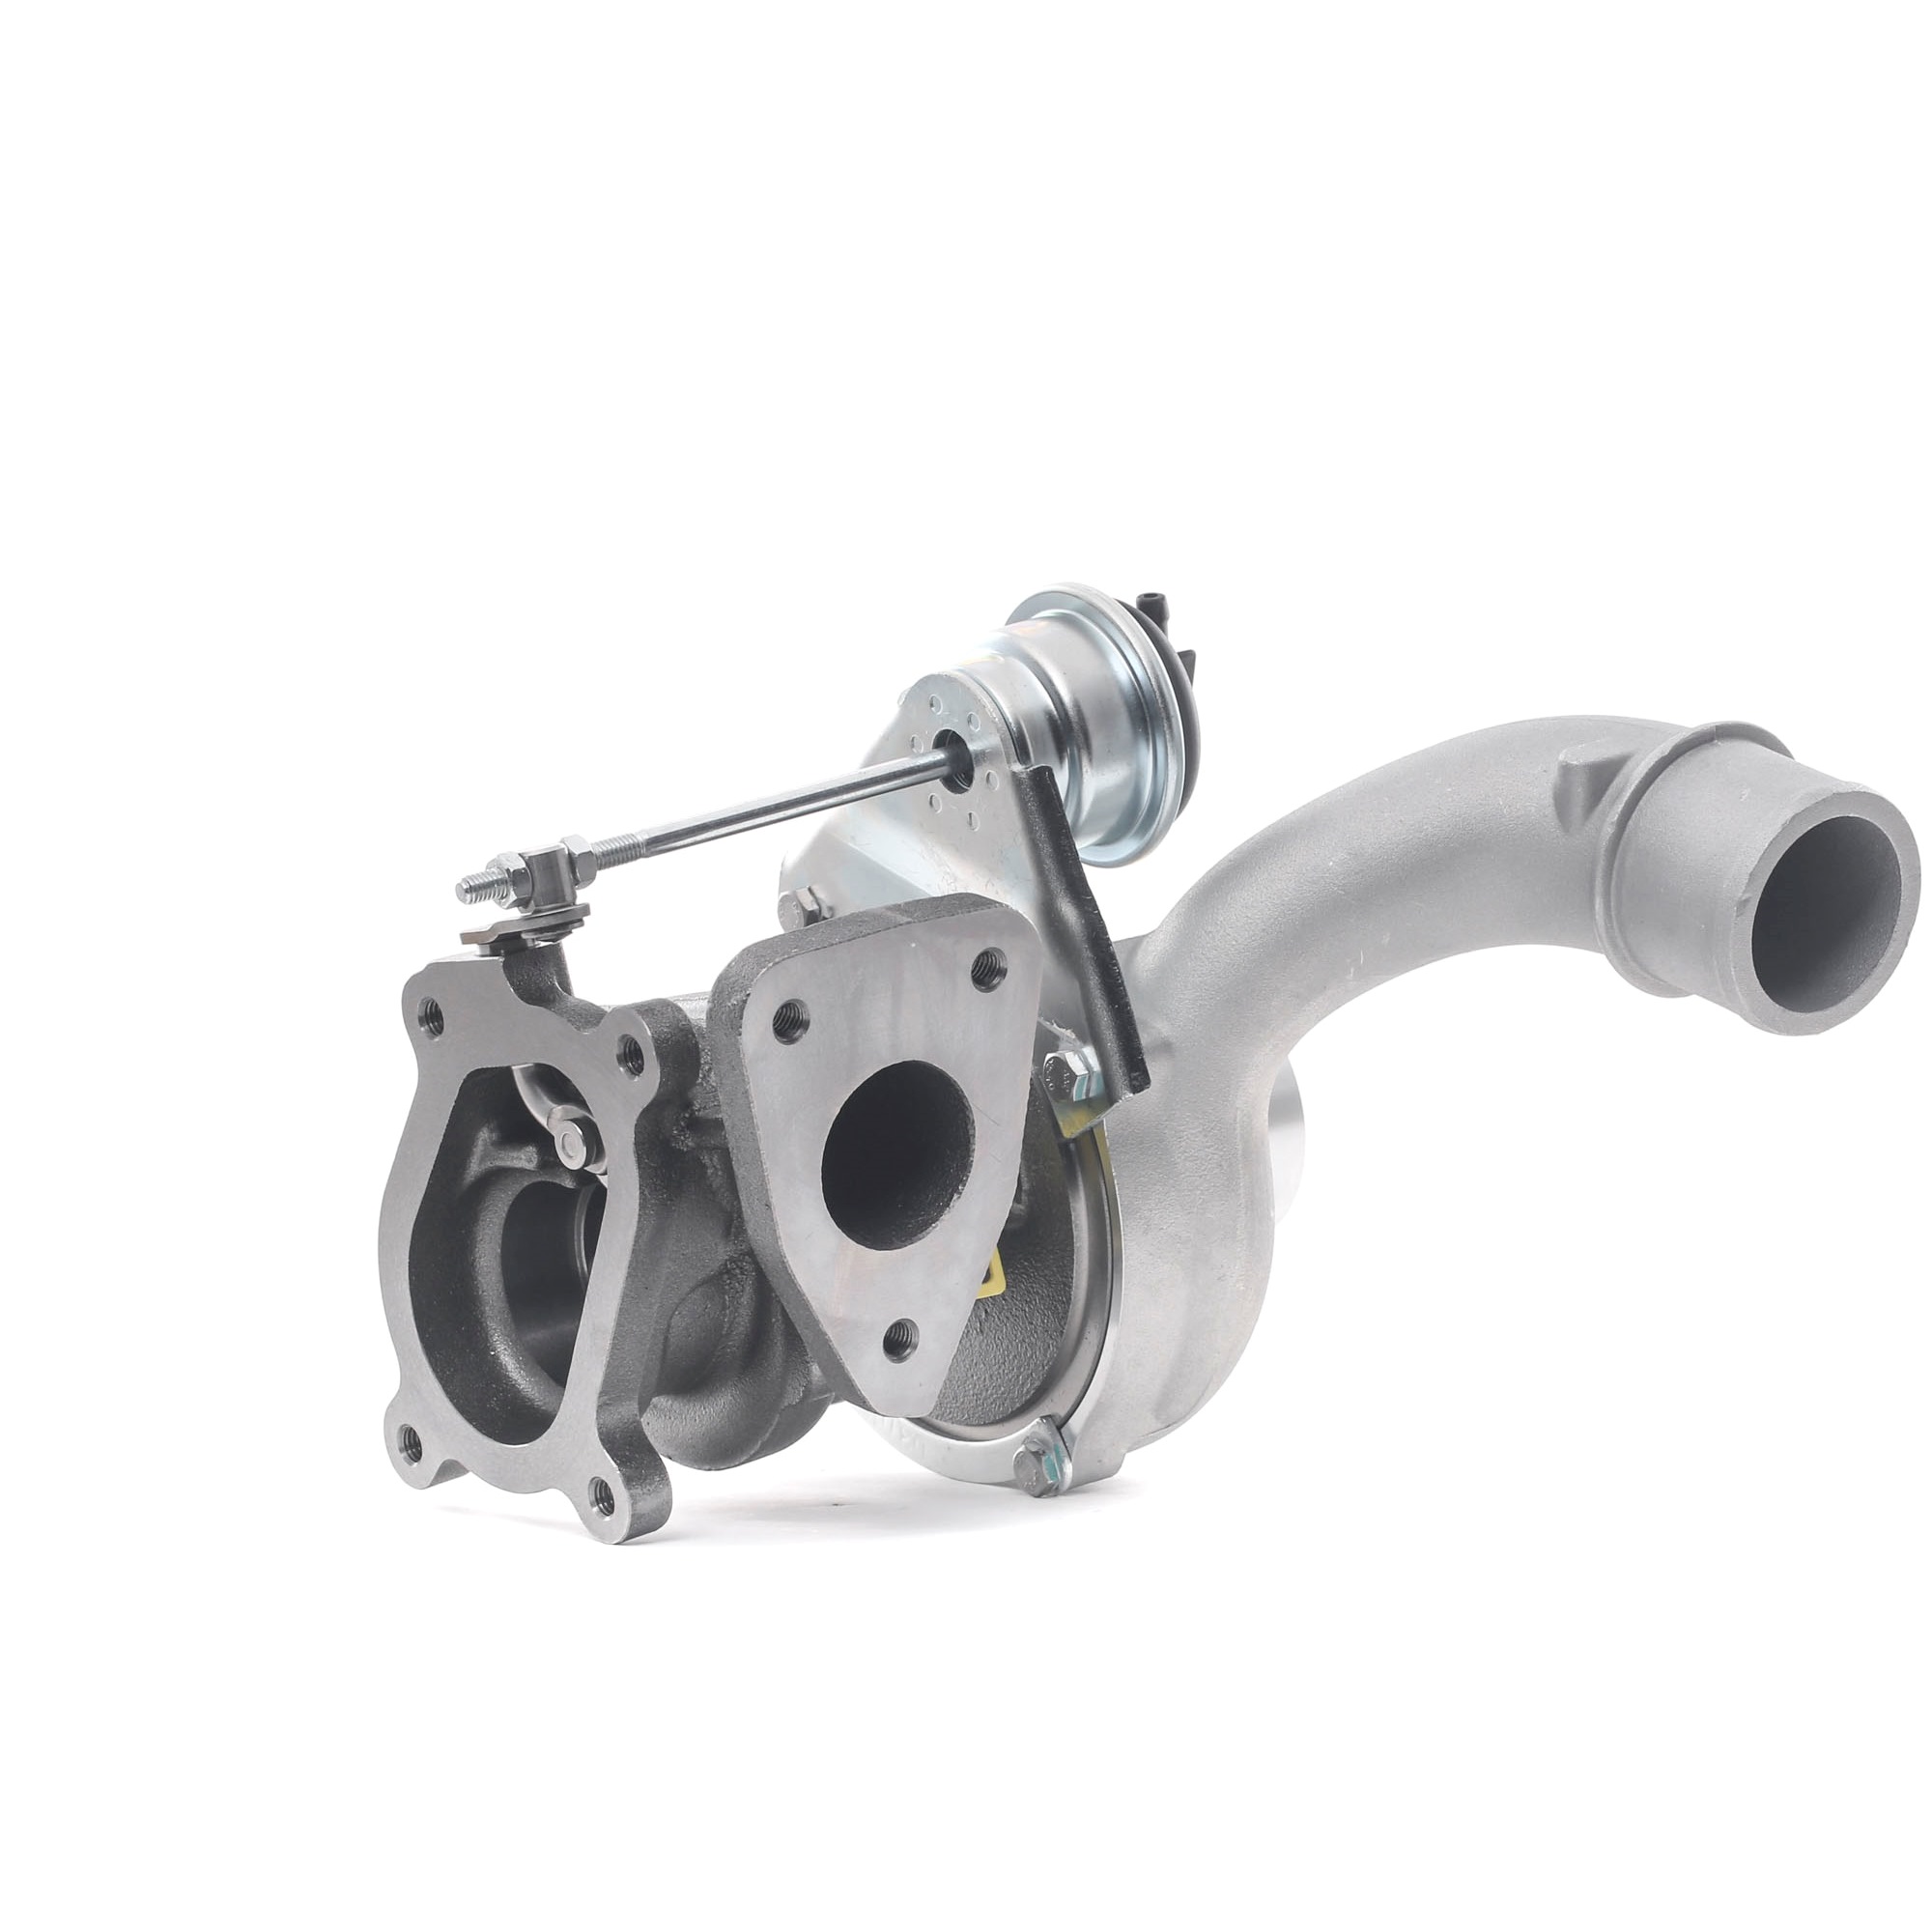 STARK SKCT-1191265 Turbocharger Turbo, Pneumatic, with gaskets/seals